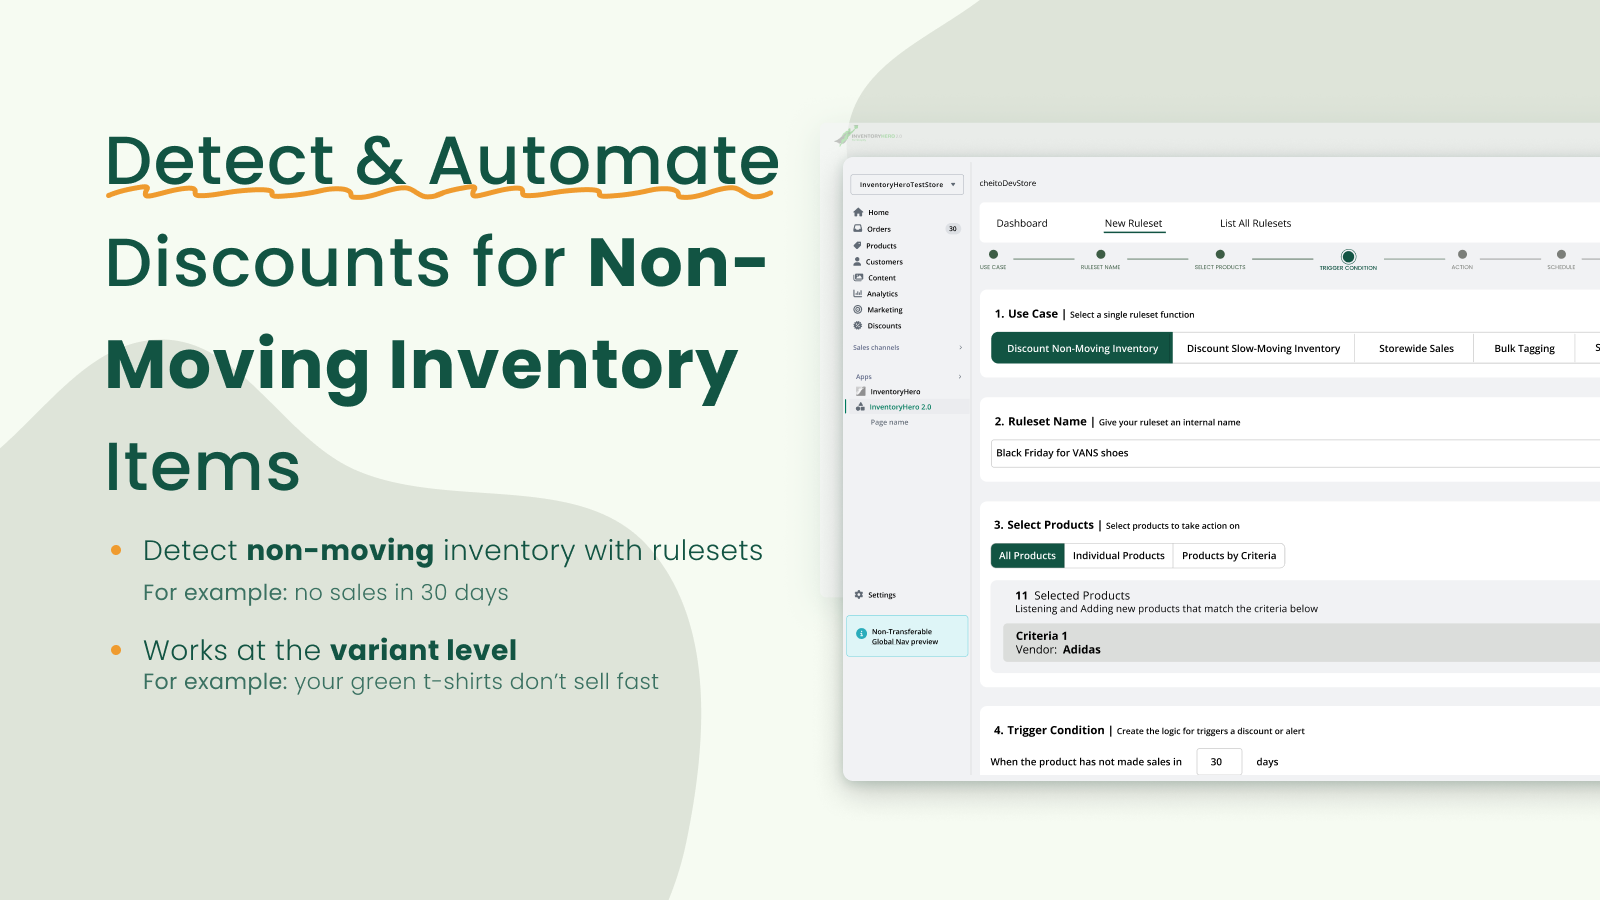 Detect & Automate Discounts for Slow-Moving Inventory Items